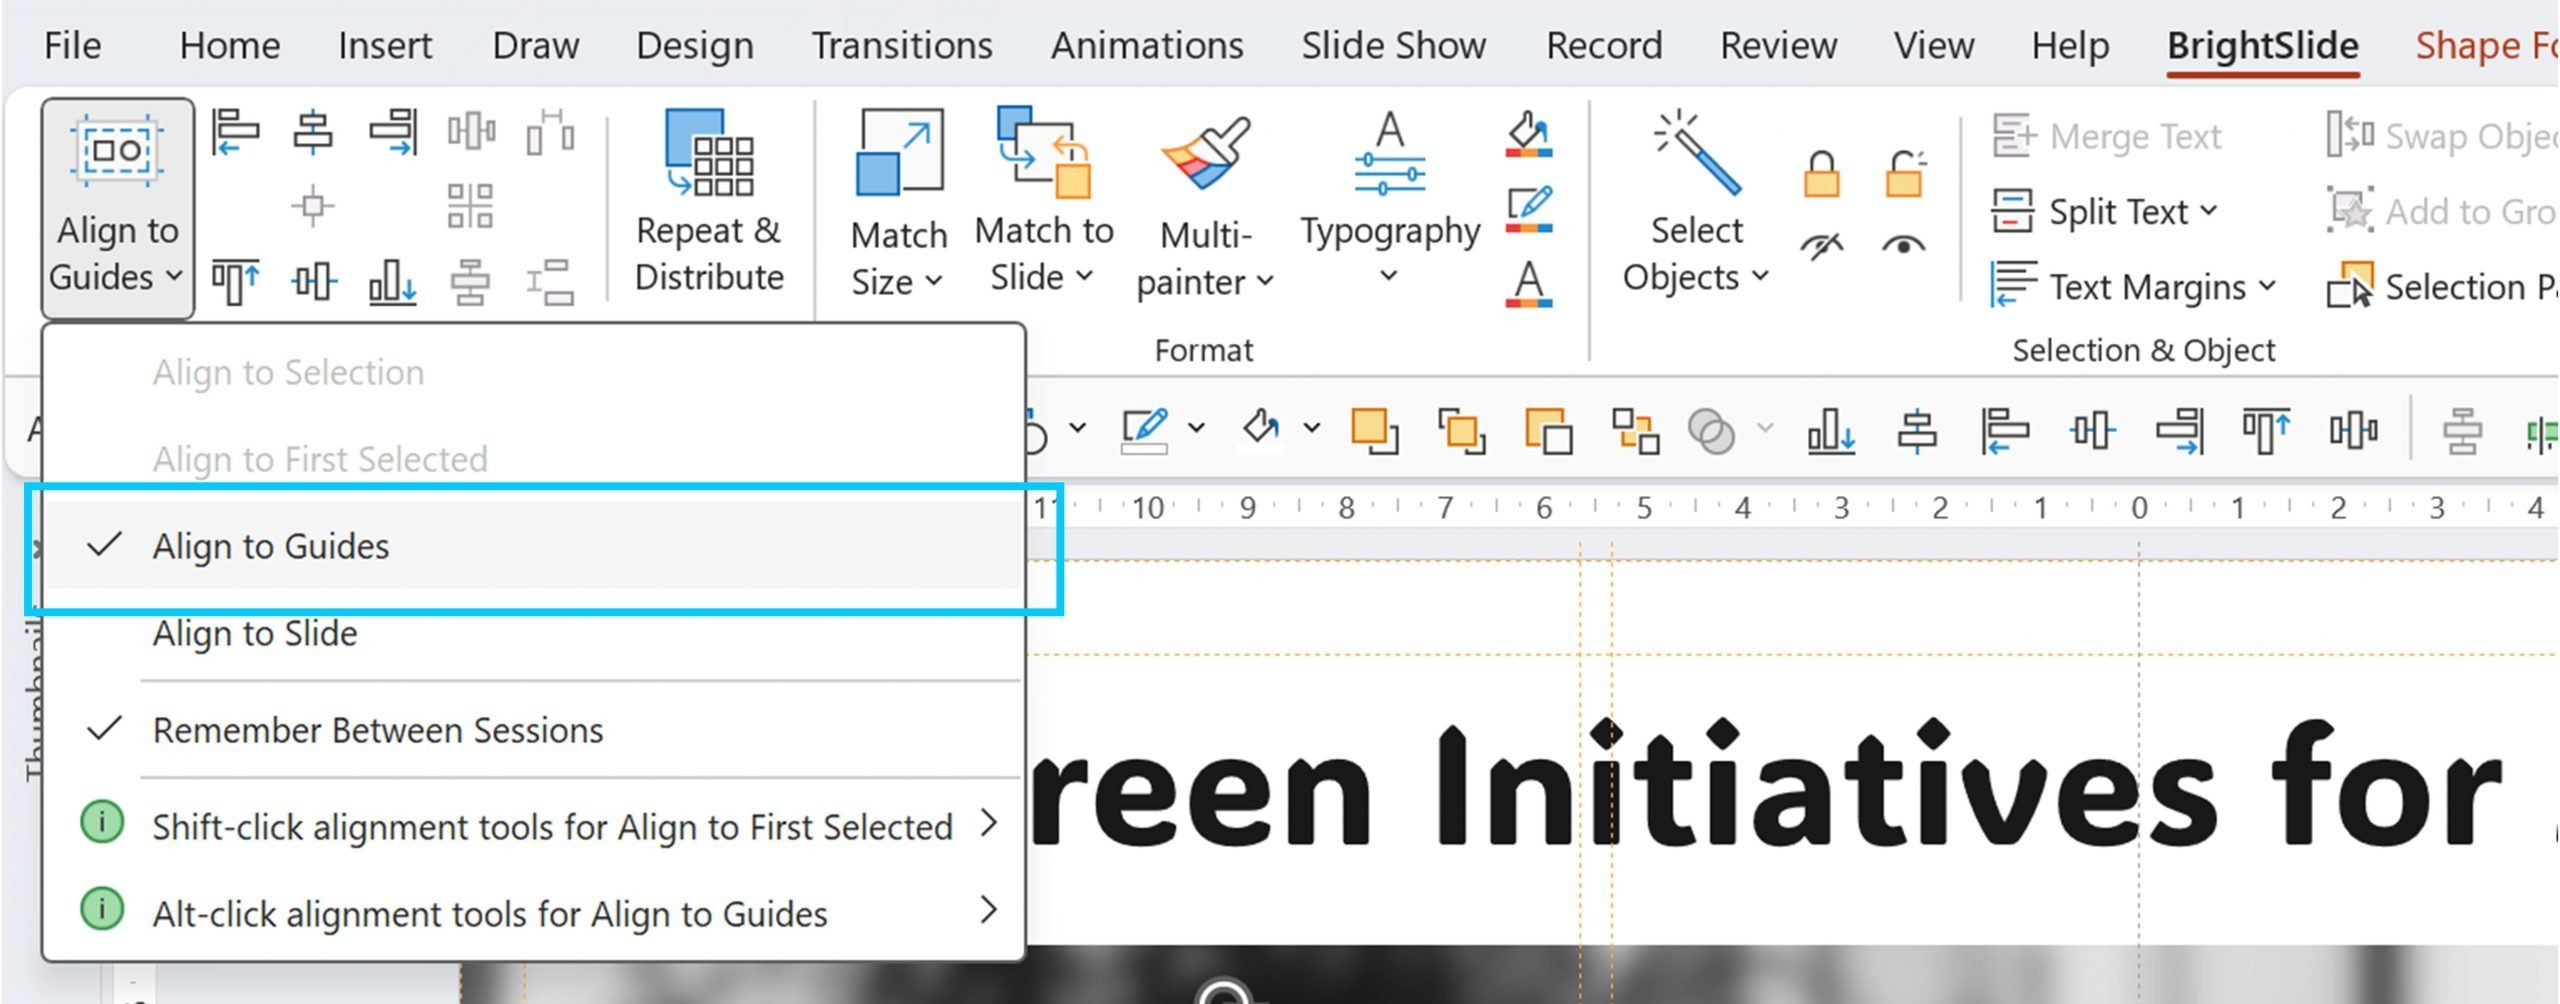 Screenshot of Align to Guides BrightSlide Alignment mode in PowerPoint